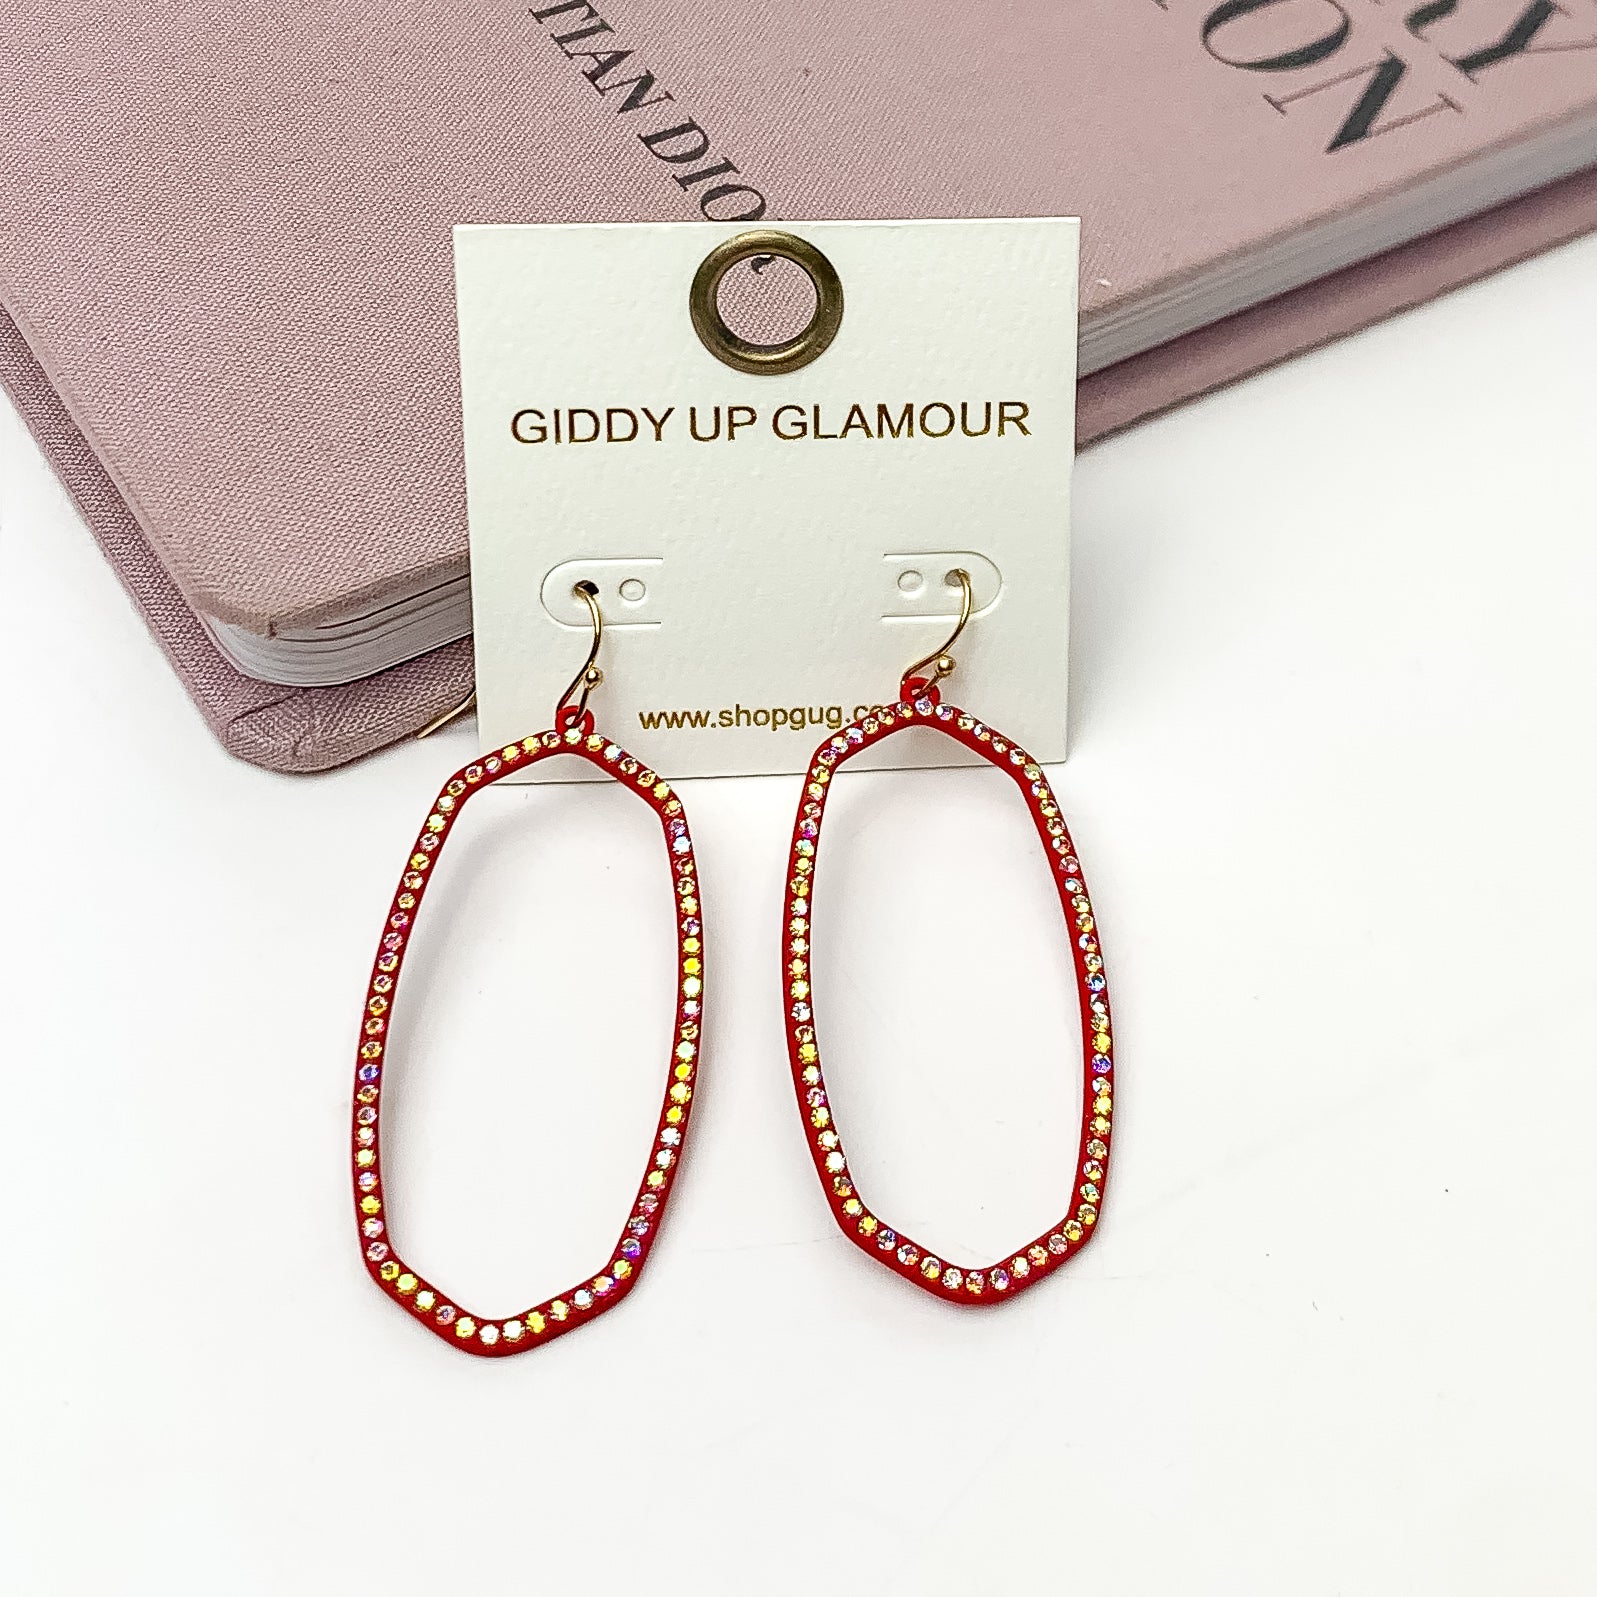 Sparkle Girl Open Oval Earrings in Hot Pink. These earrings are pictured laying against a pink book with a white background.